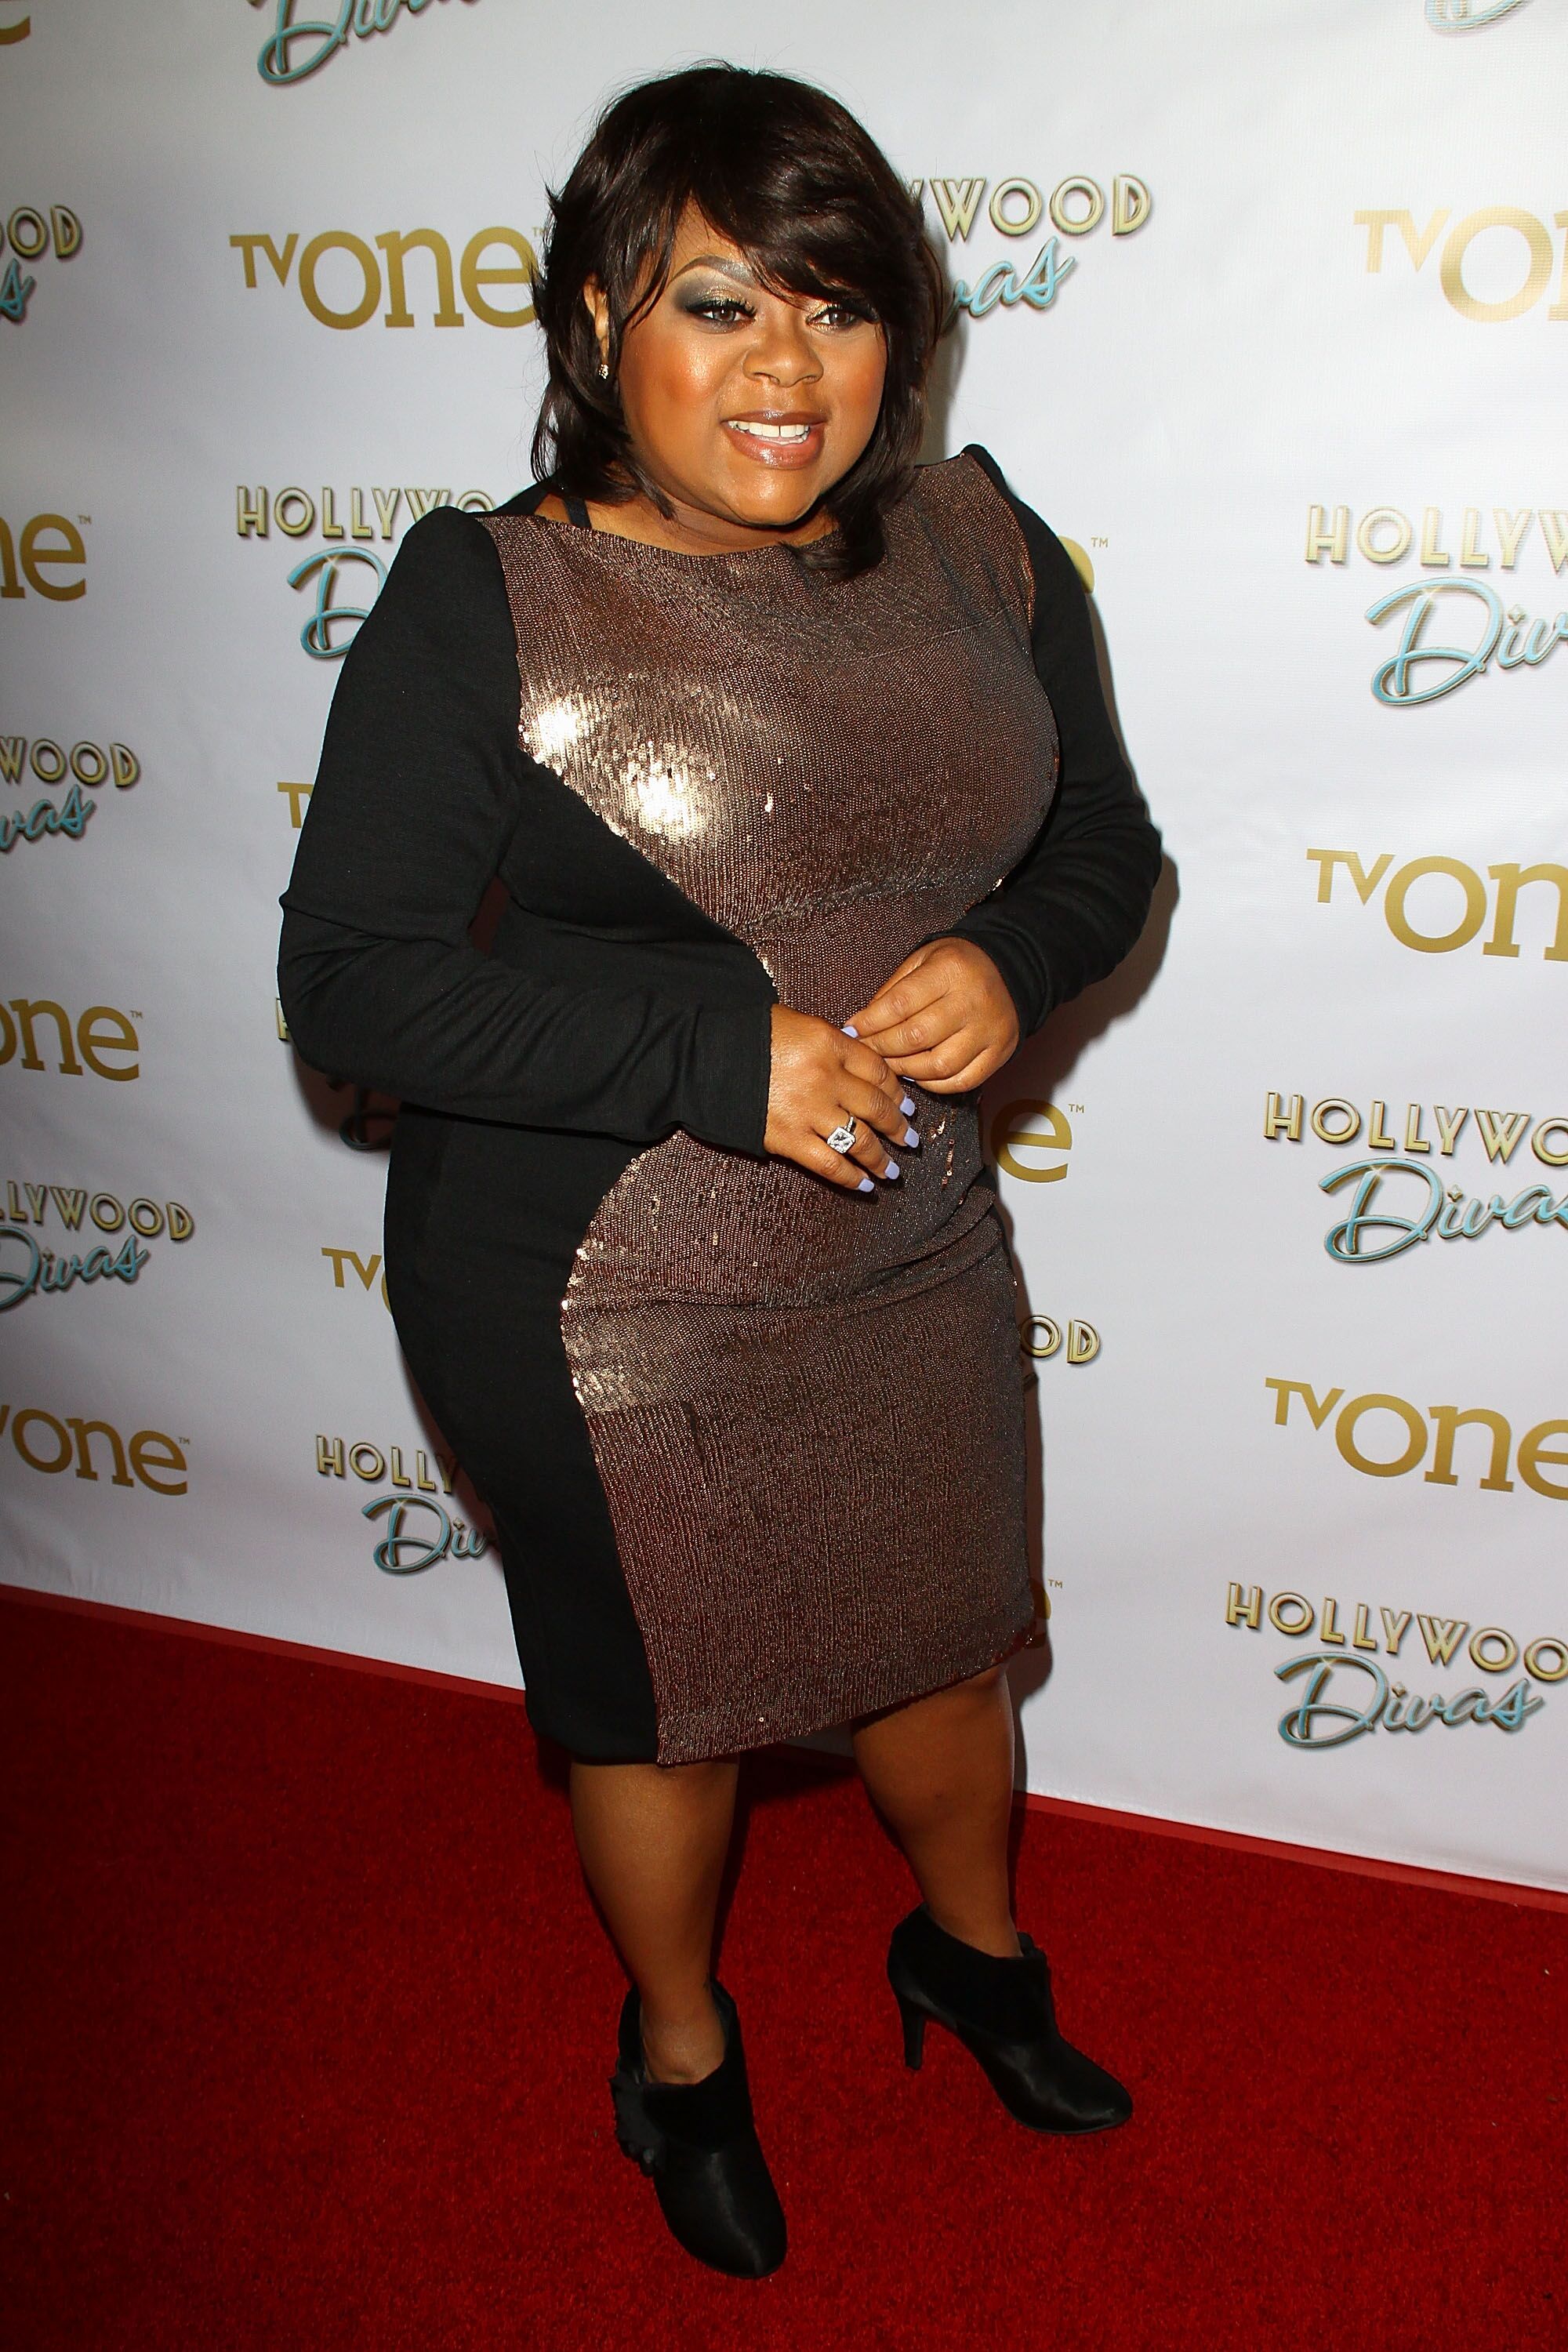 Countess Vaughn attends a TVOne event for "Hollywood Divas" | Source: Getty Images/GlobalImagesUkraine